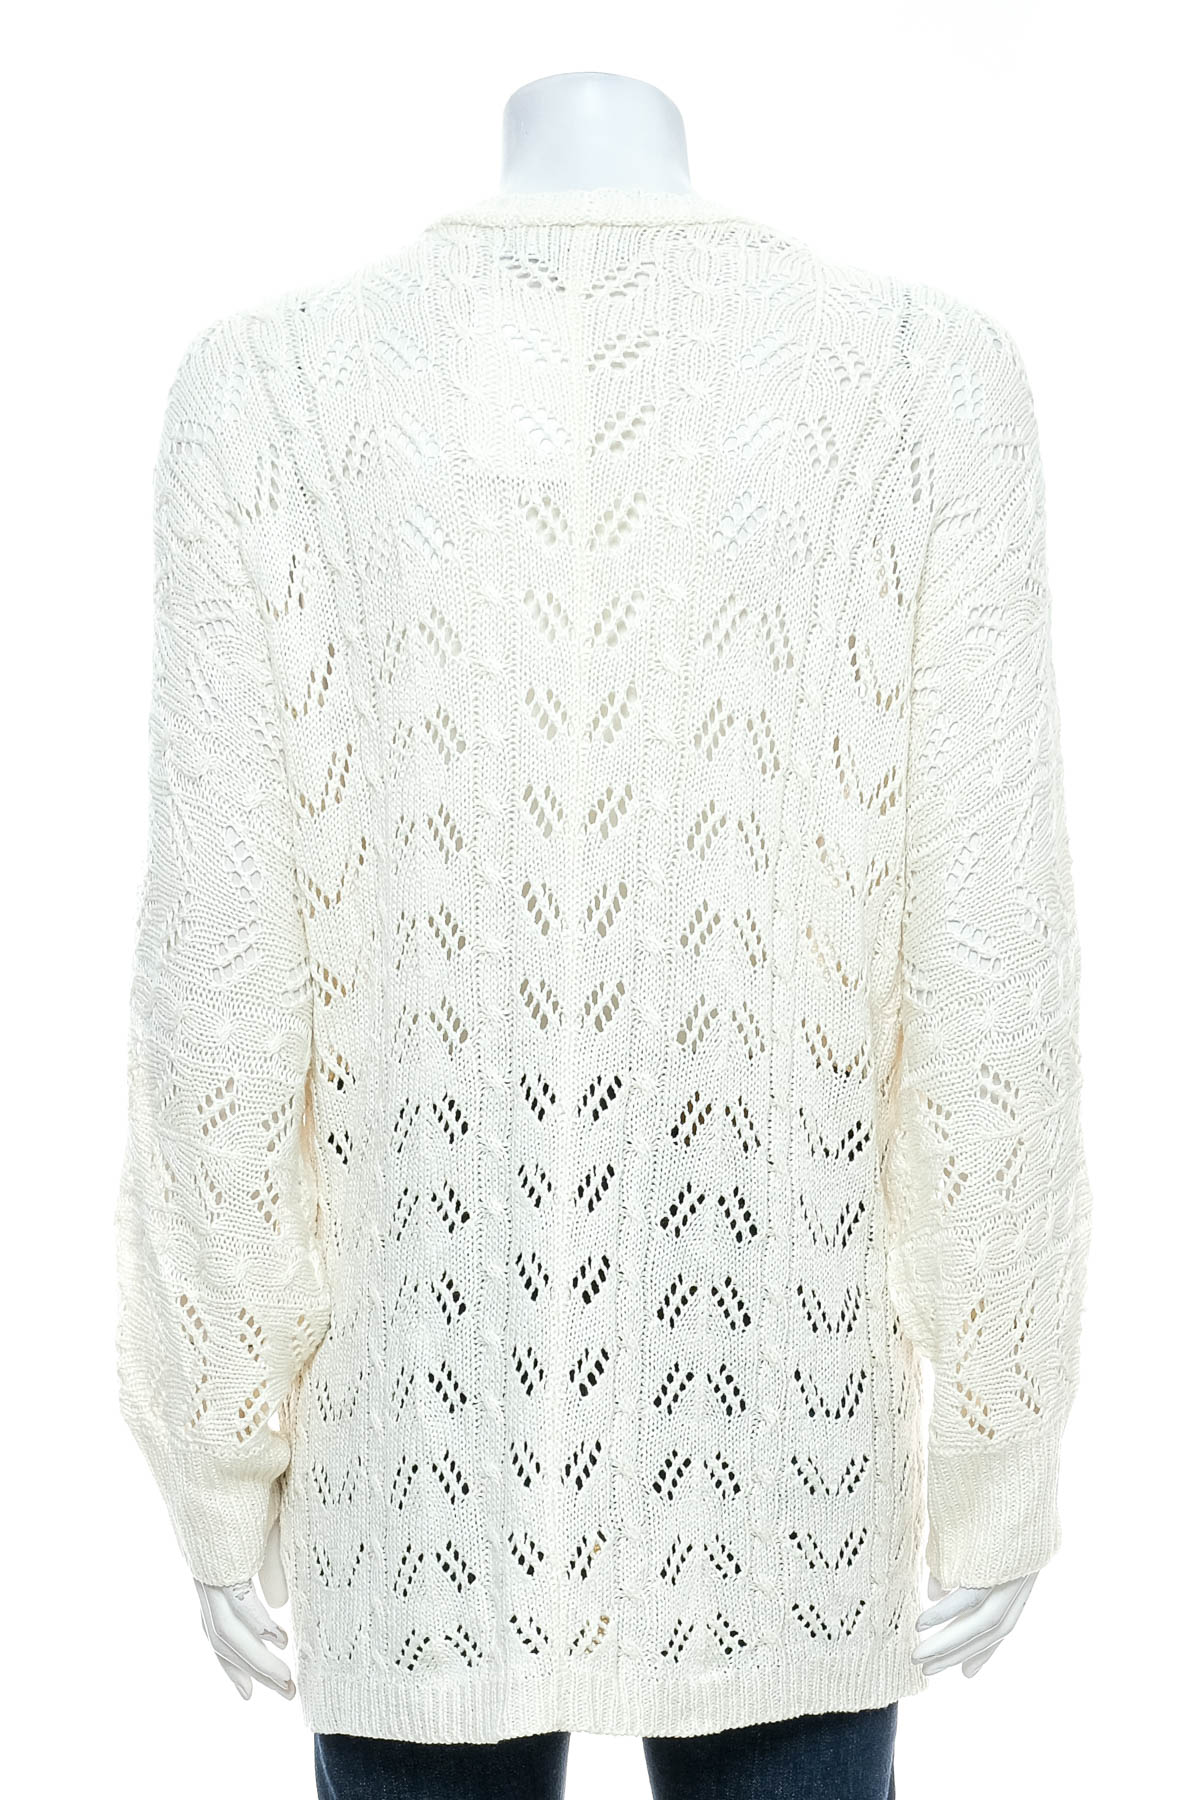 Women's cardigan - Marled BY REUNITED CLOTHING - 1